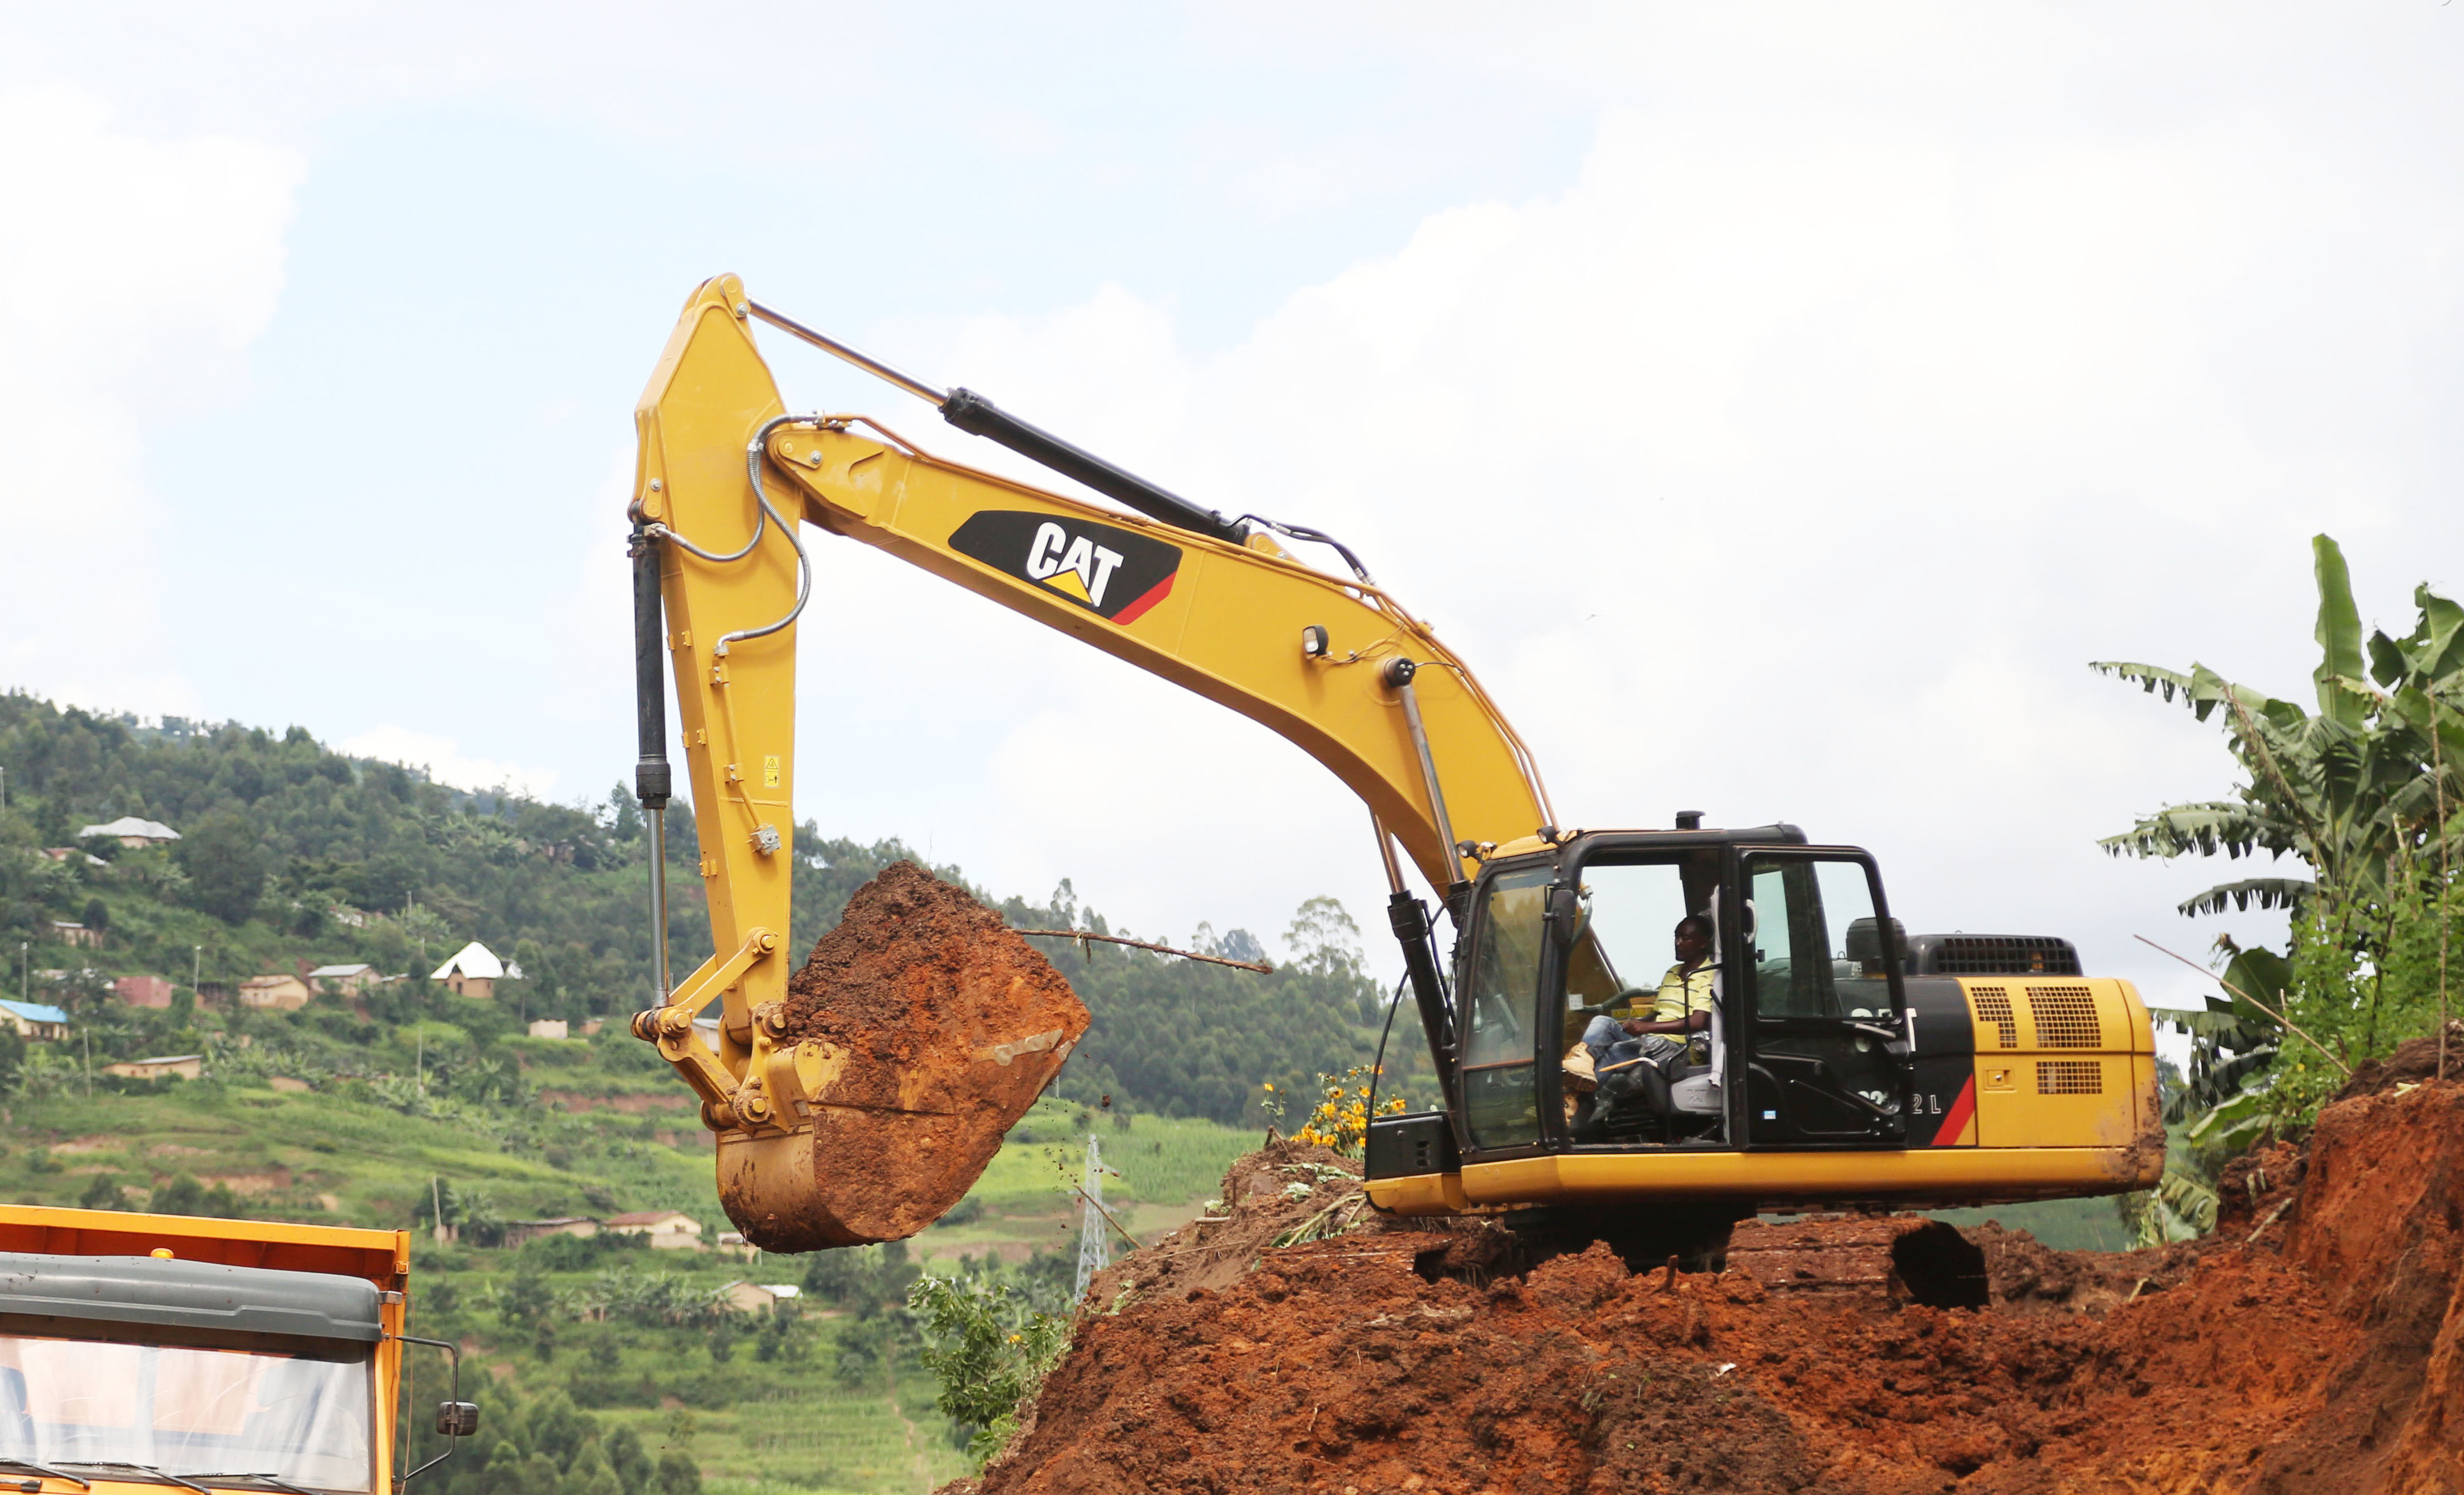 An excavator works at a road construction site in Rwanda. Photo by Sam Ngendahimana